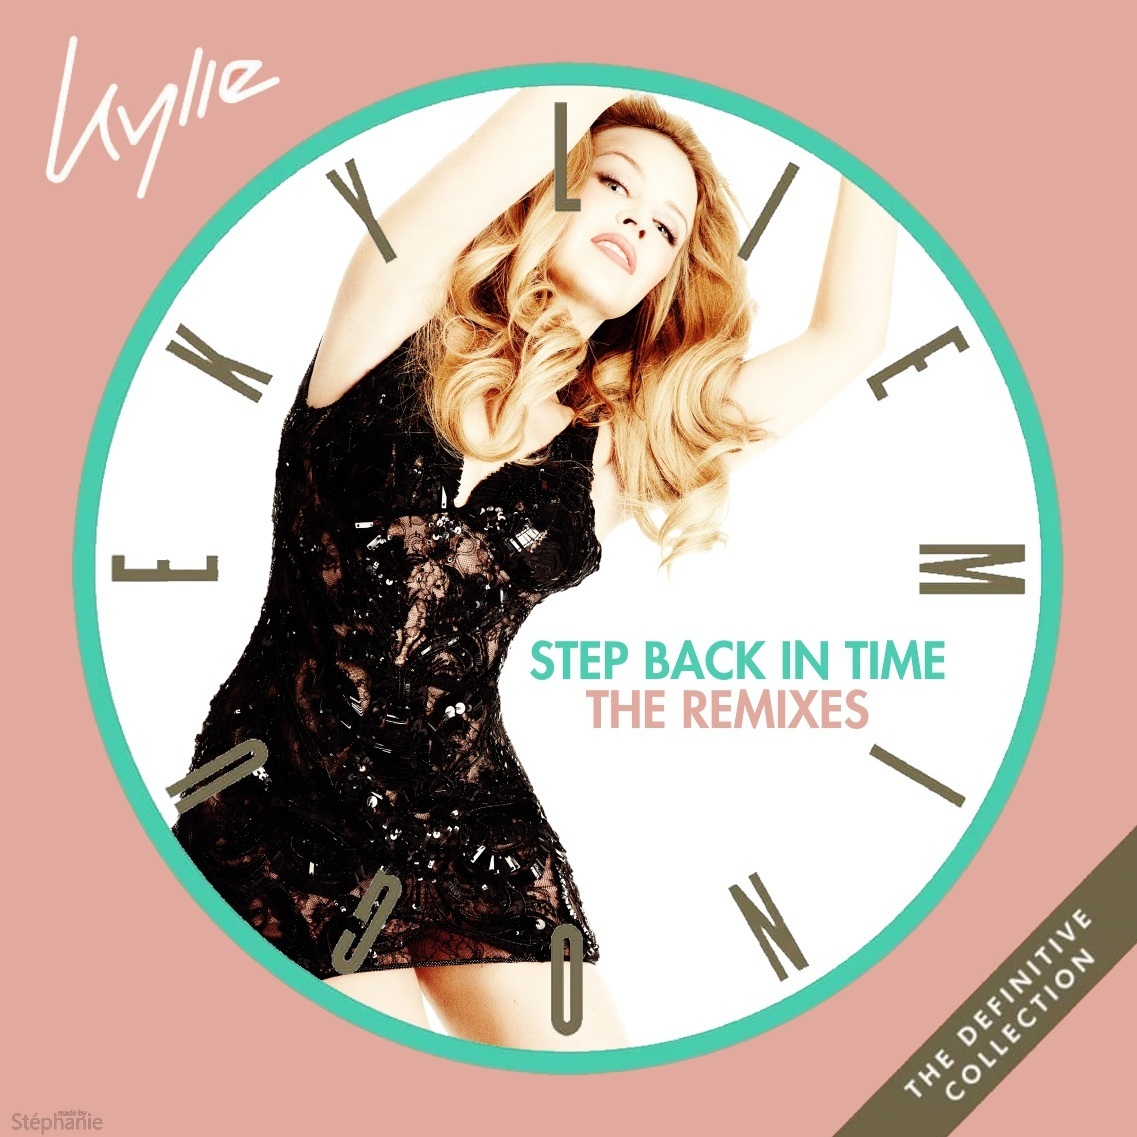 Step back песня. Step back in time (the Definitive collection). Kylie the Definitive collection. Kylie Minogue Step back in time the Definitive collection 2019.